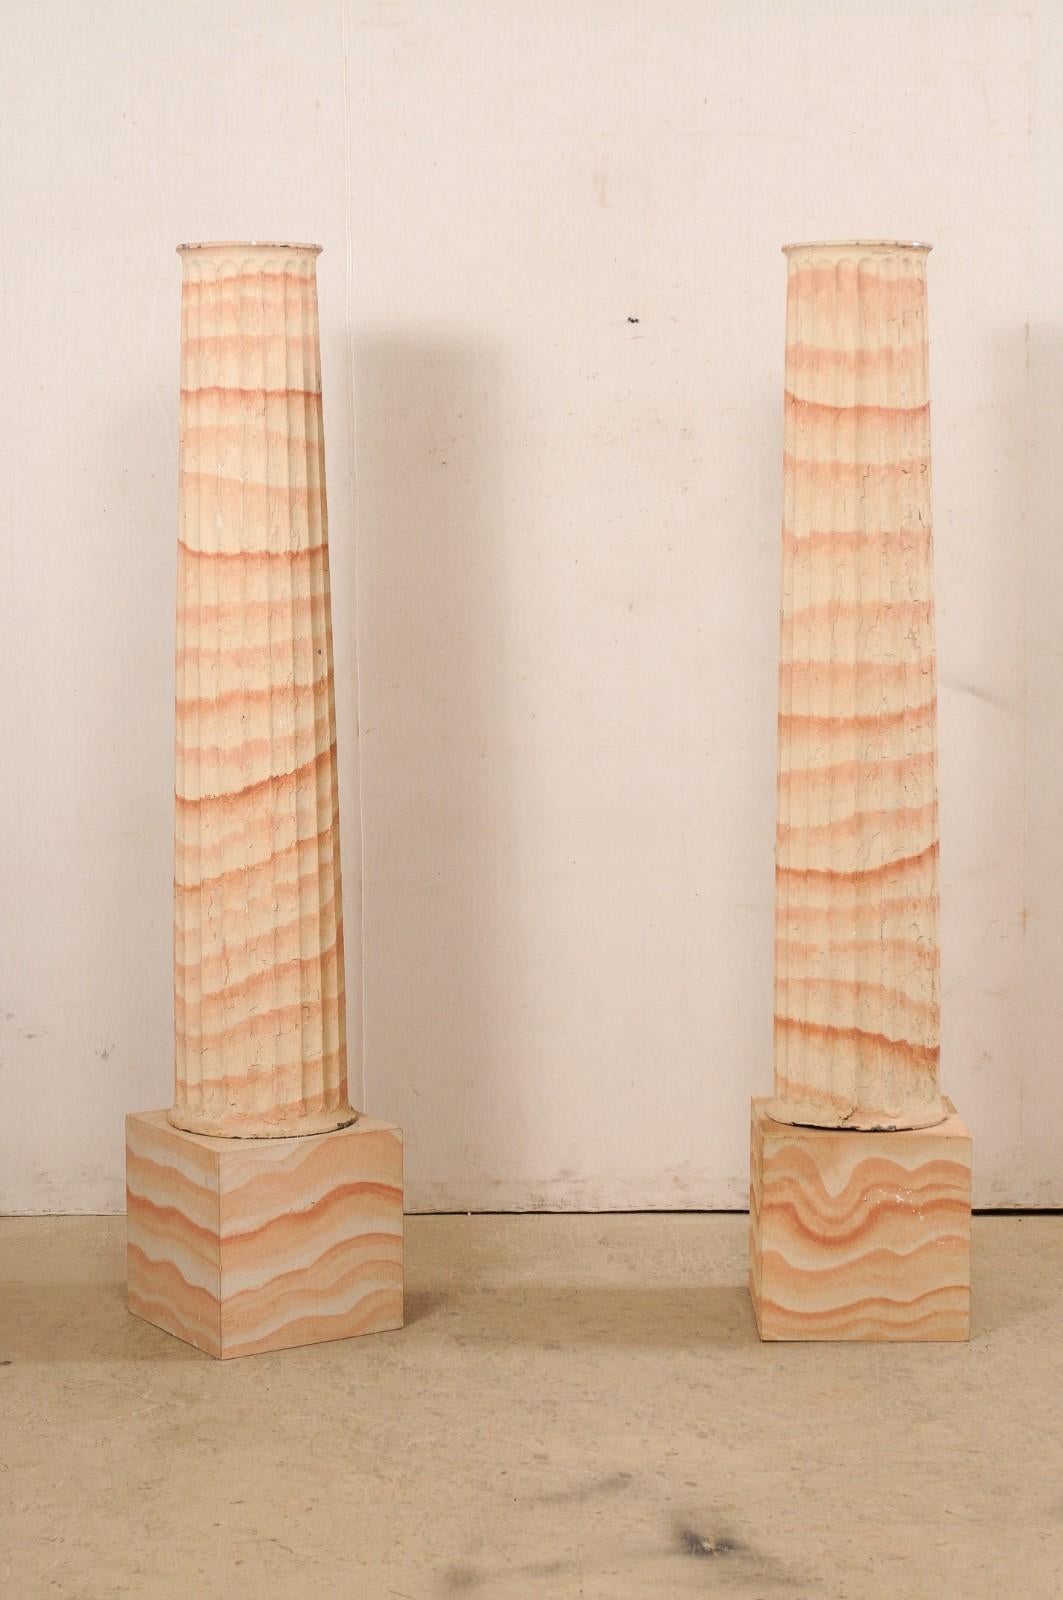 A French pair of iron columns with textured artisan hand-painted finish from the turn of the 19th and 20th century. These antique pillars from France, standing just shy of 6.5 feet in height, have rounded and fluted bodies that are thicker at their